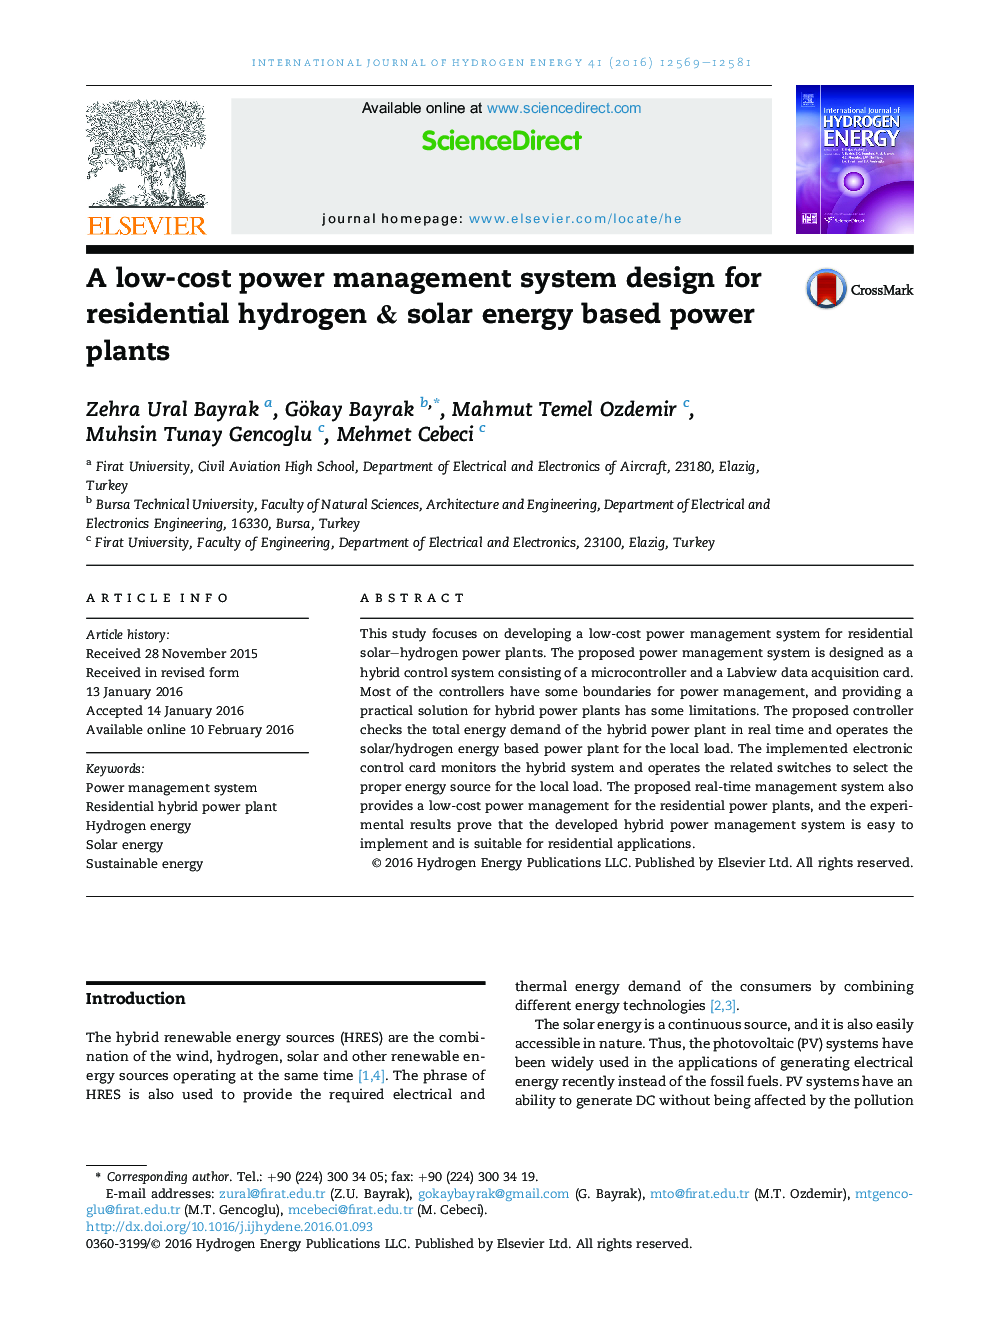 A low-cost power management system design for residential hydrogen & solar energy based power plants